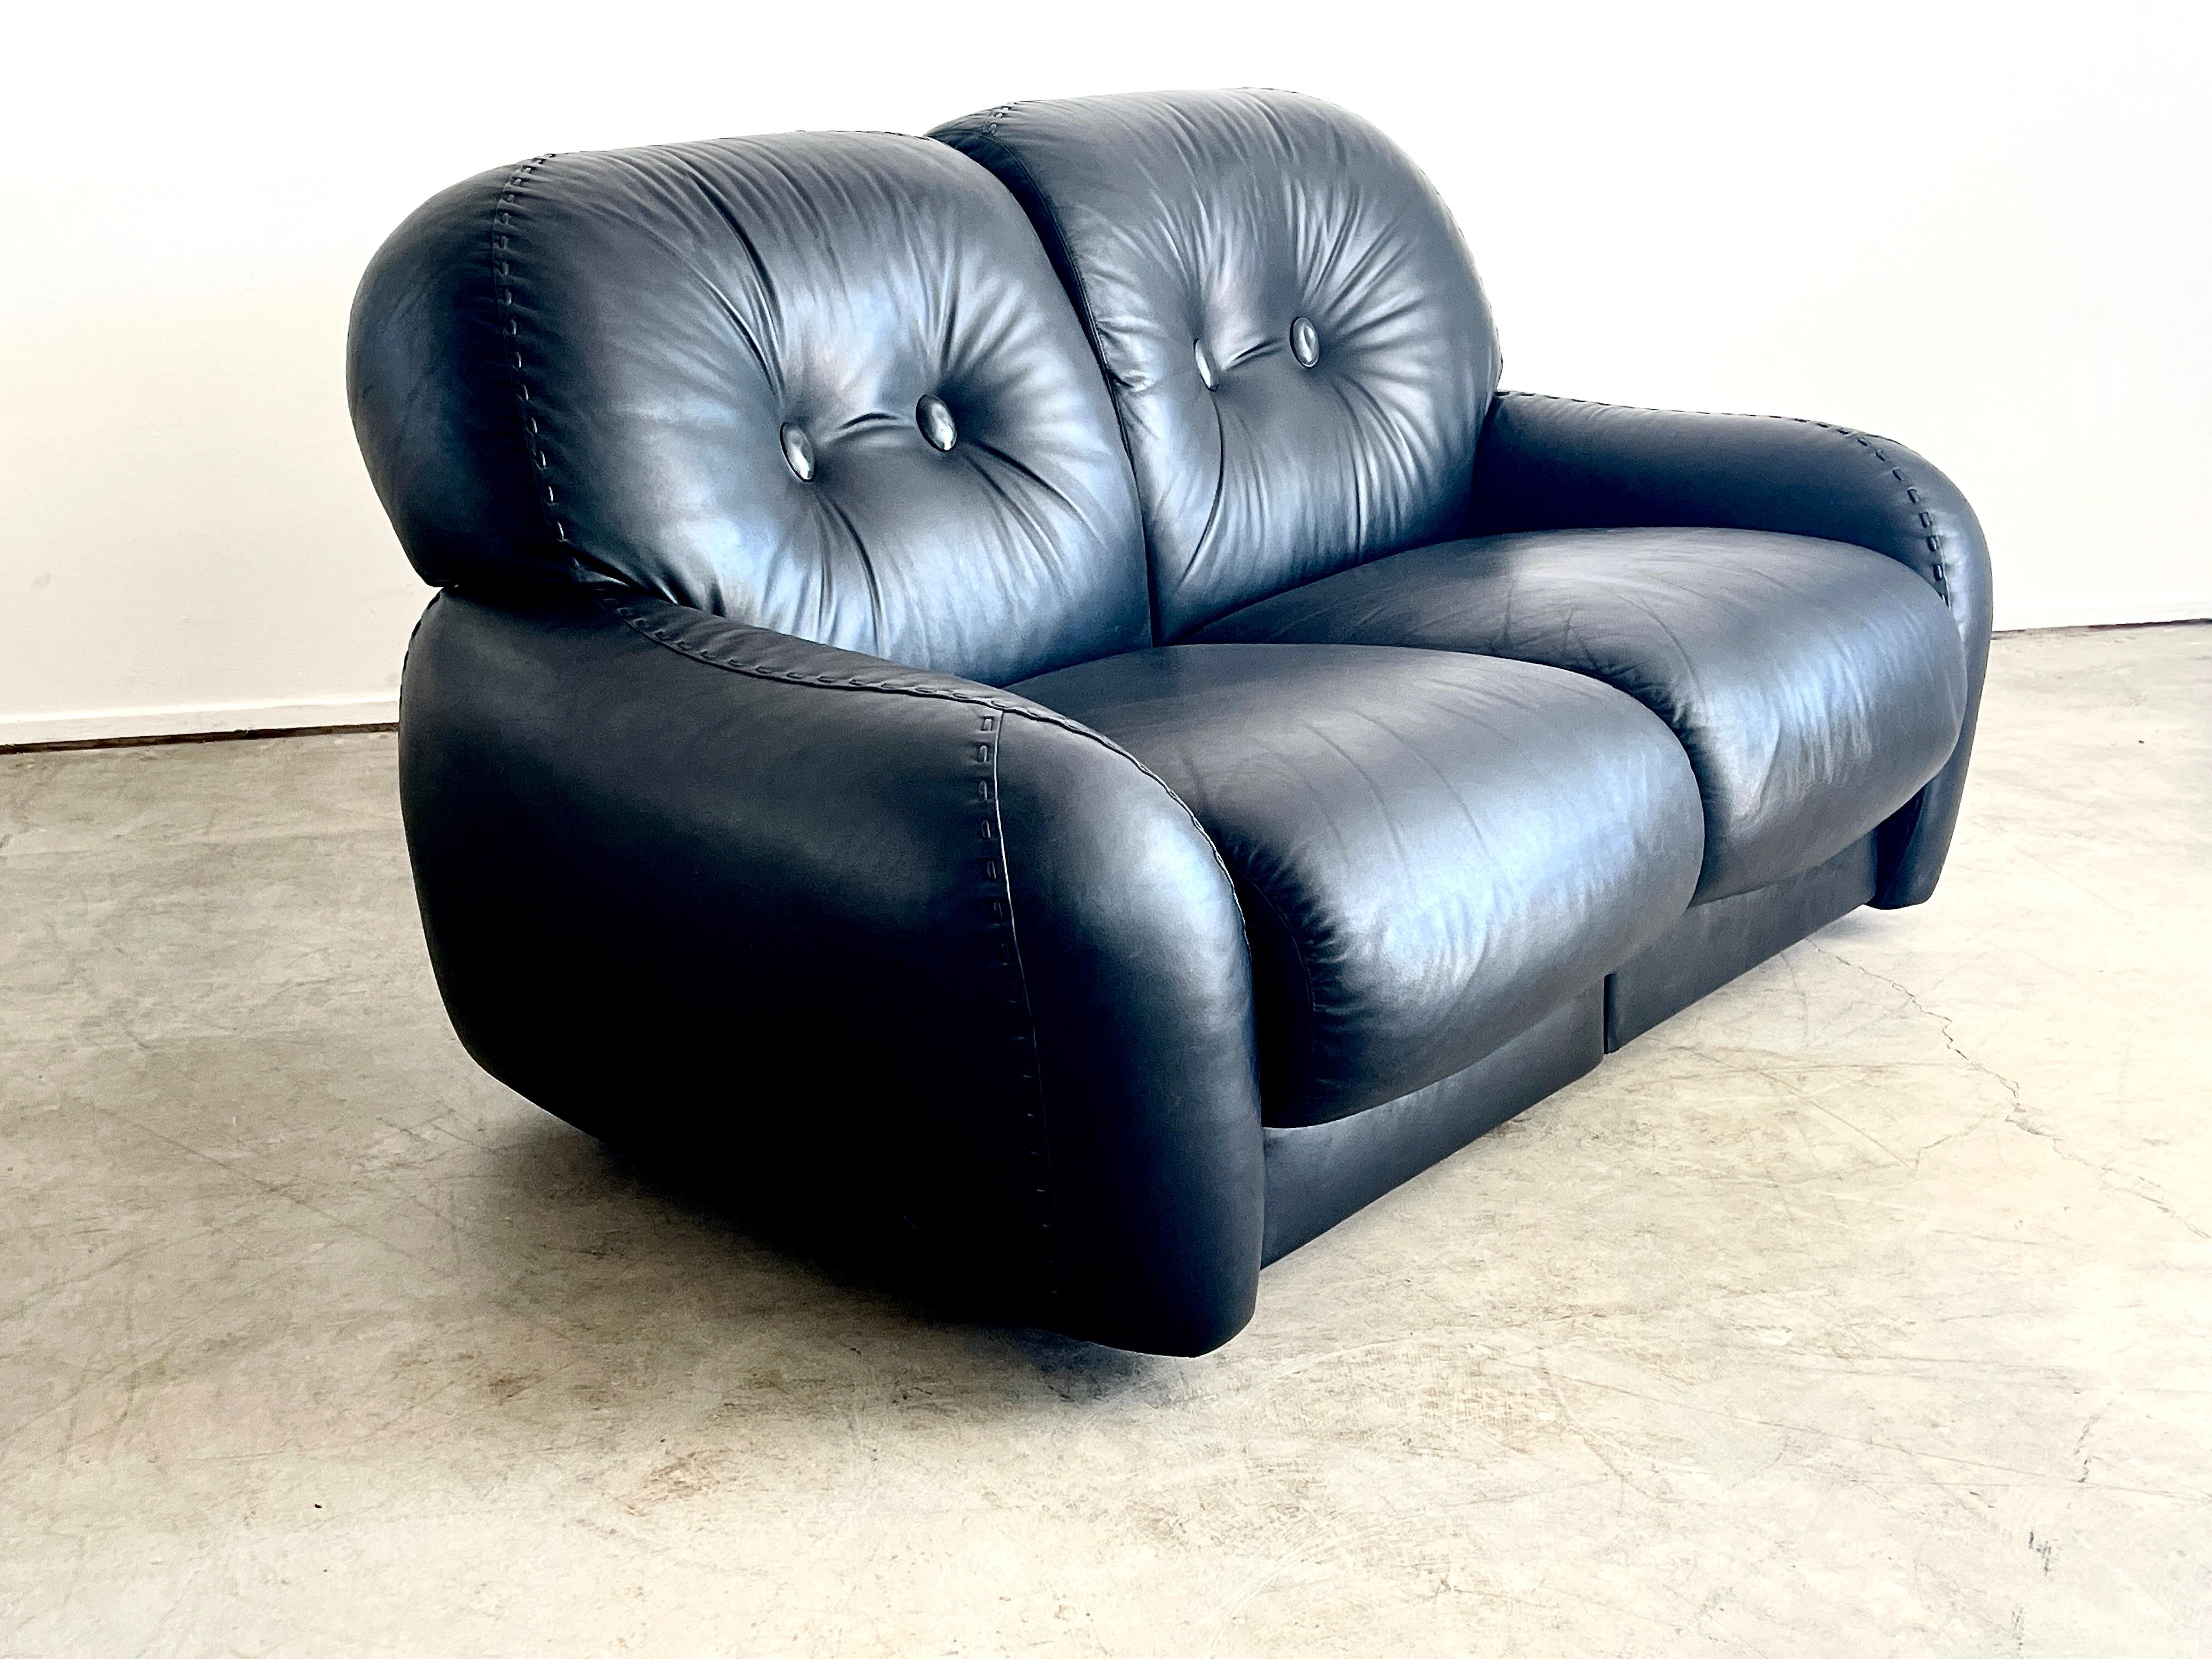 Italian leather settee by ADRIANO PIAZZESI, circa 1960's.
Part of a set with matching 4 seat sofa and pair of club chairs with ottoman.
 (sold separately) 
Great original black leather with 2 seats that have a feature that slightly reclines each